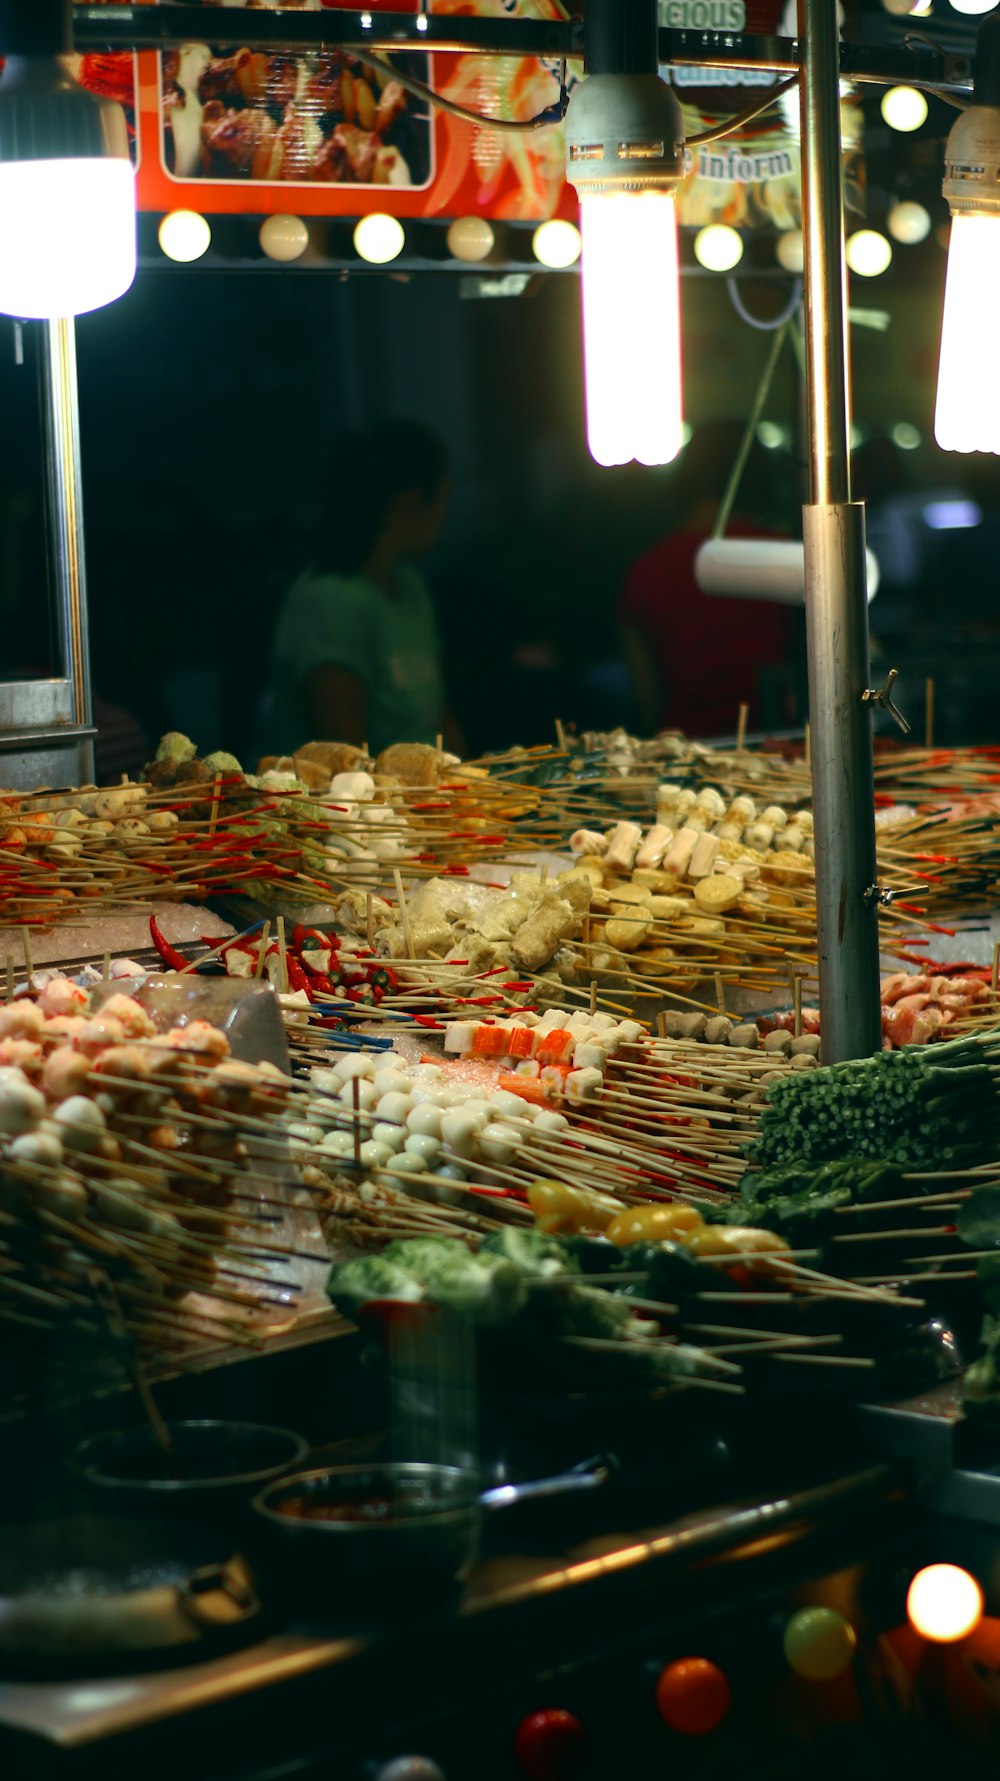 people standing near food stall during night time